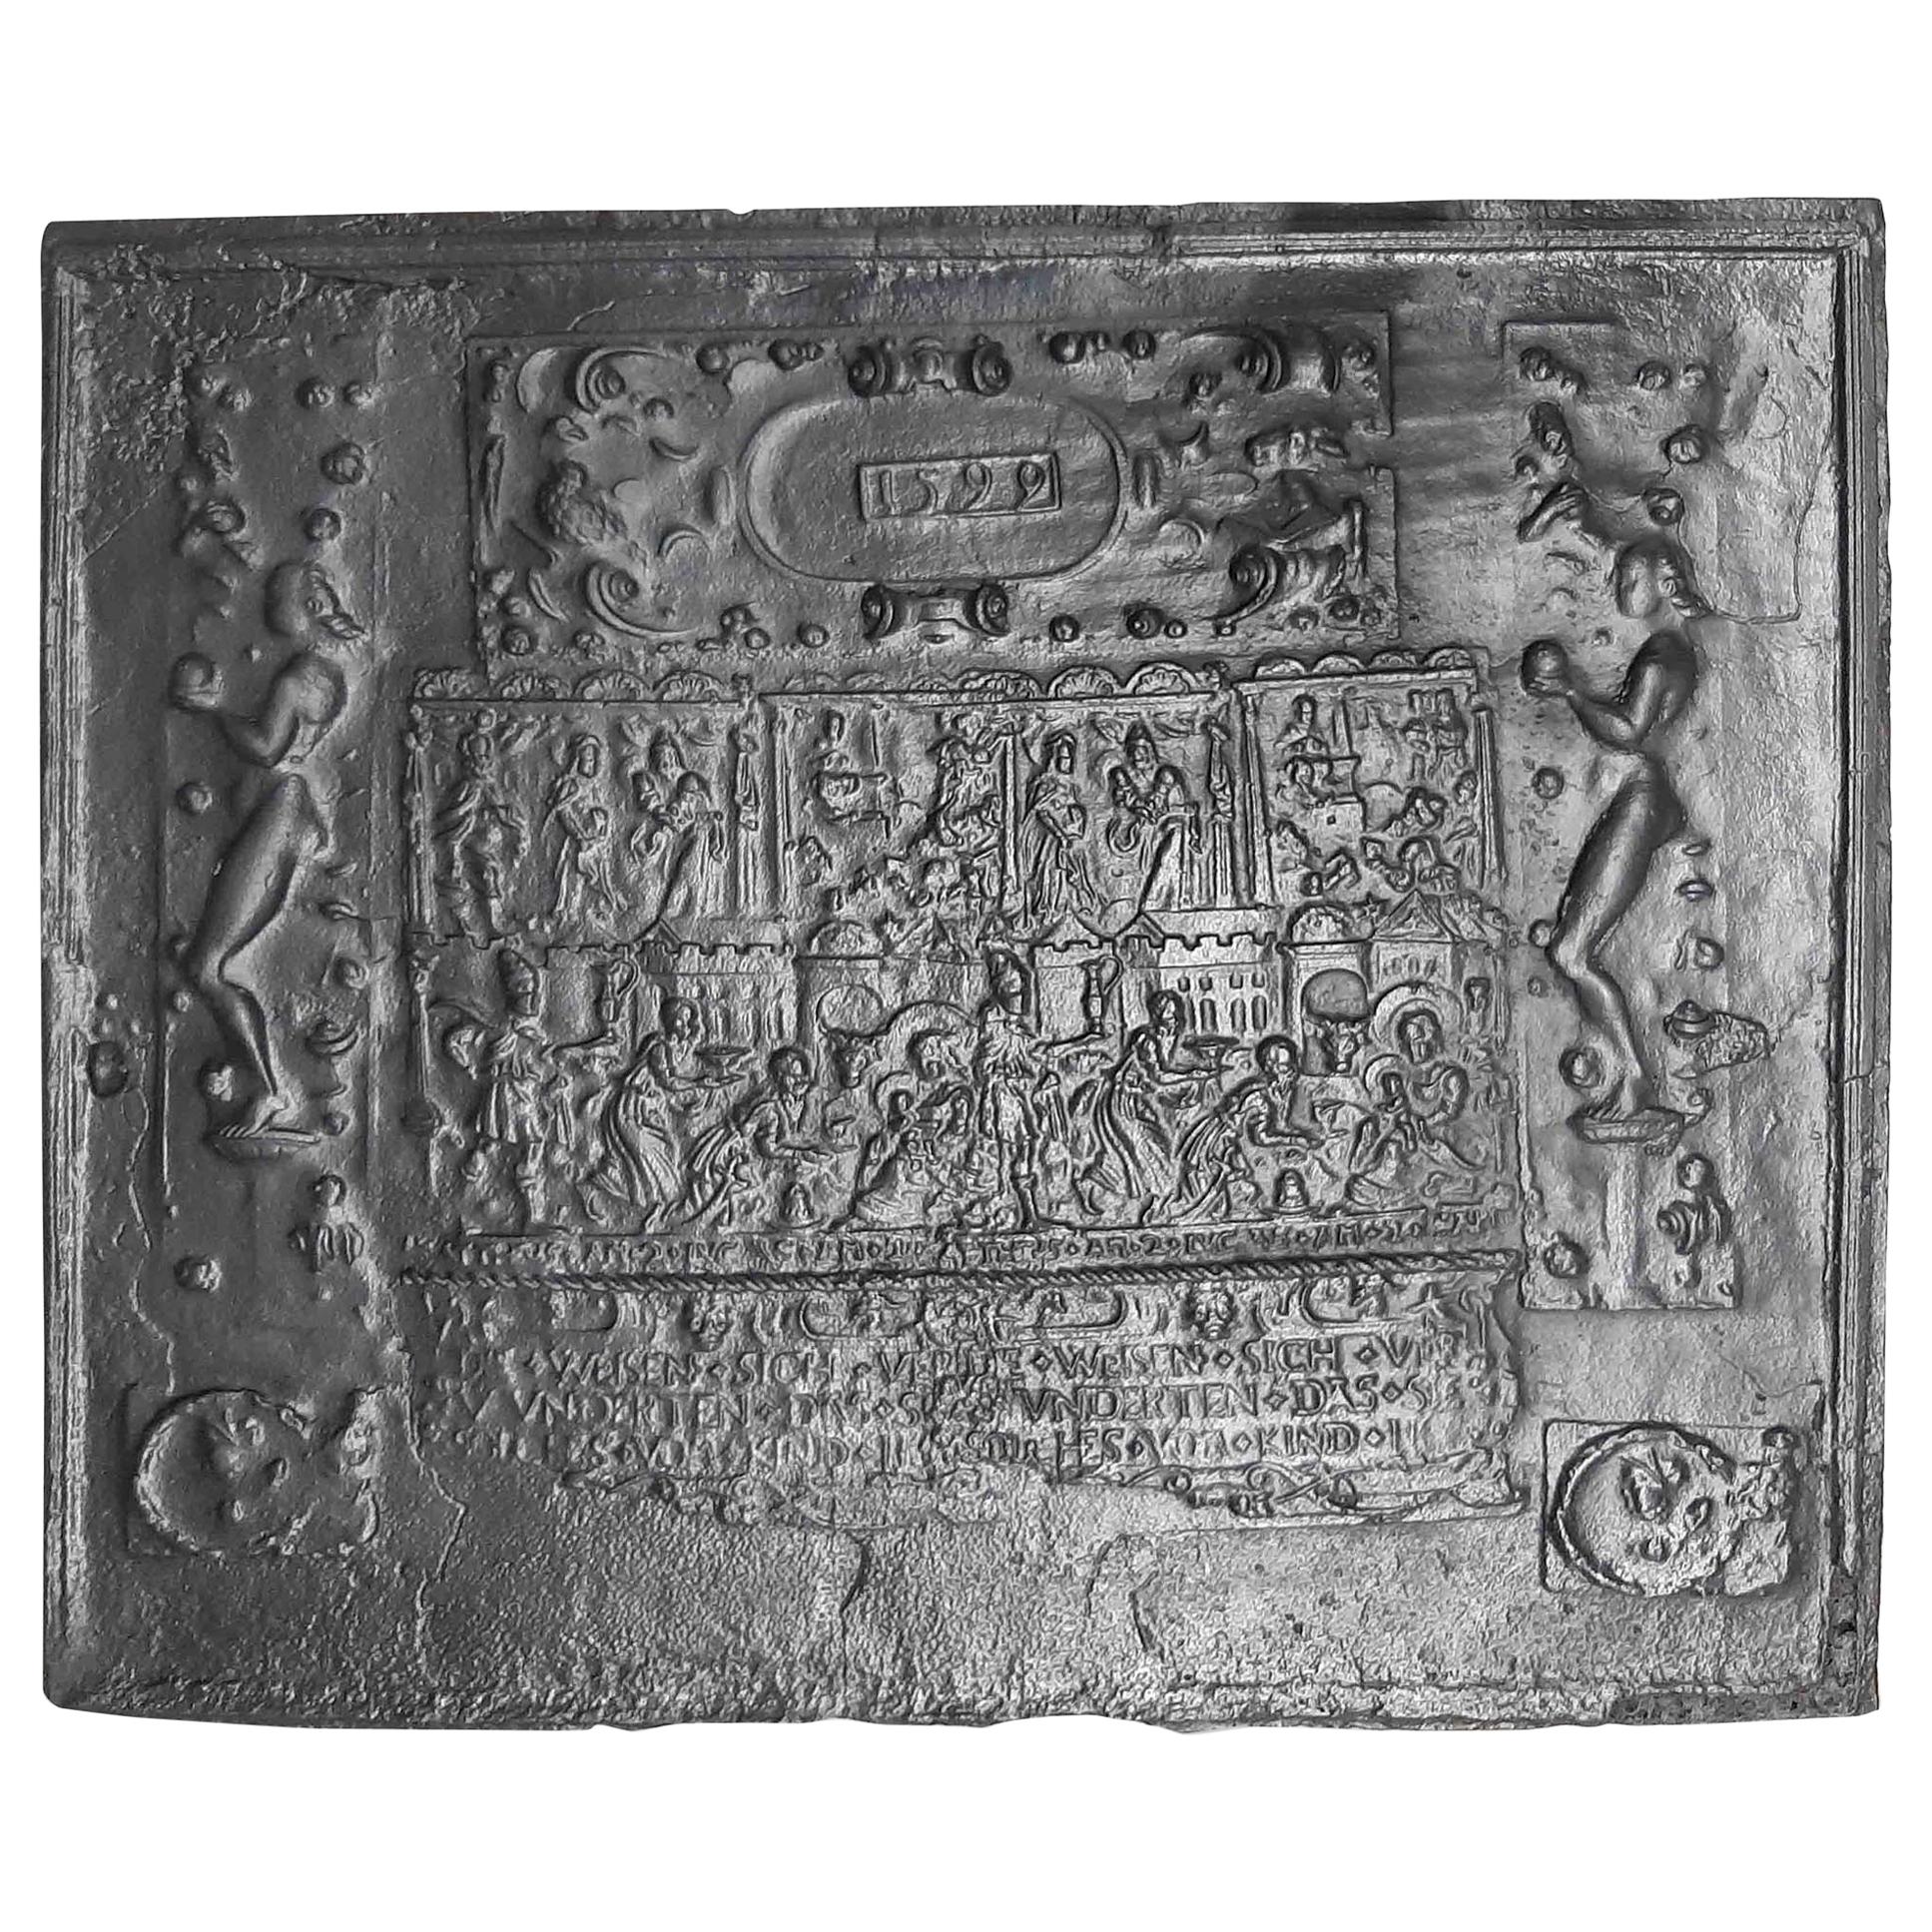 Antique 16th Century Fireplace Back Plate Depicted with the Birth of Christ